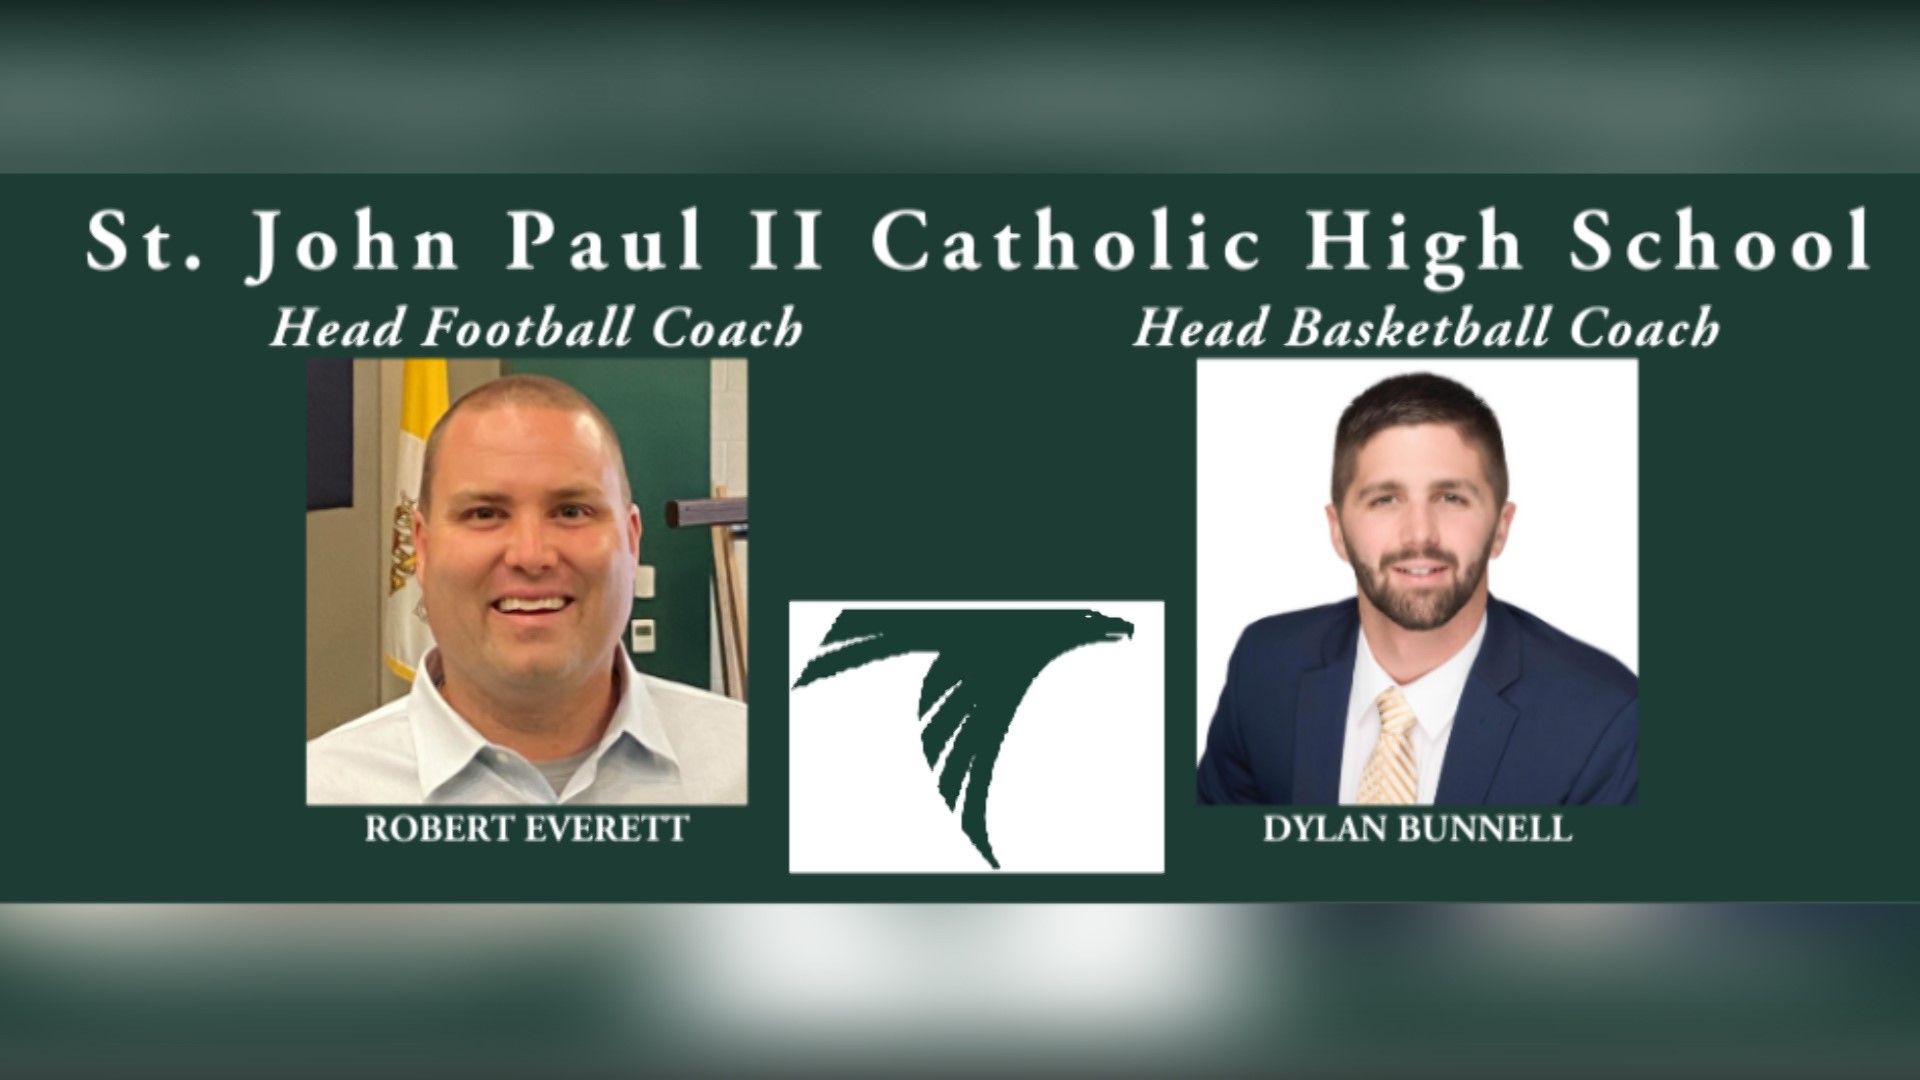 Headmaster Dr. Jeremiah Russell & President Dr. Lanny Hollis are very pleased to announce the appointment of two new leaders among the JPII senior coaching staff.